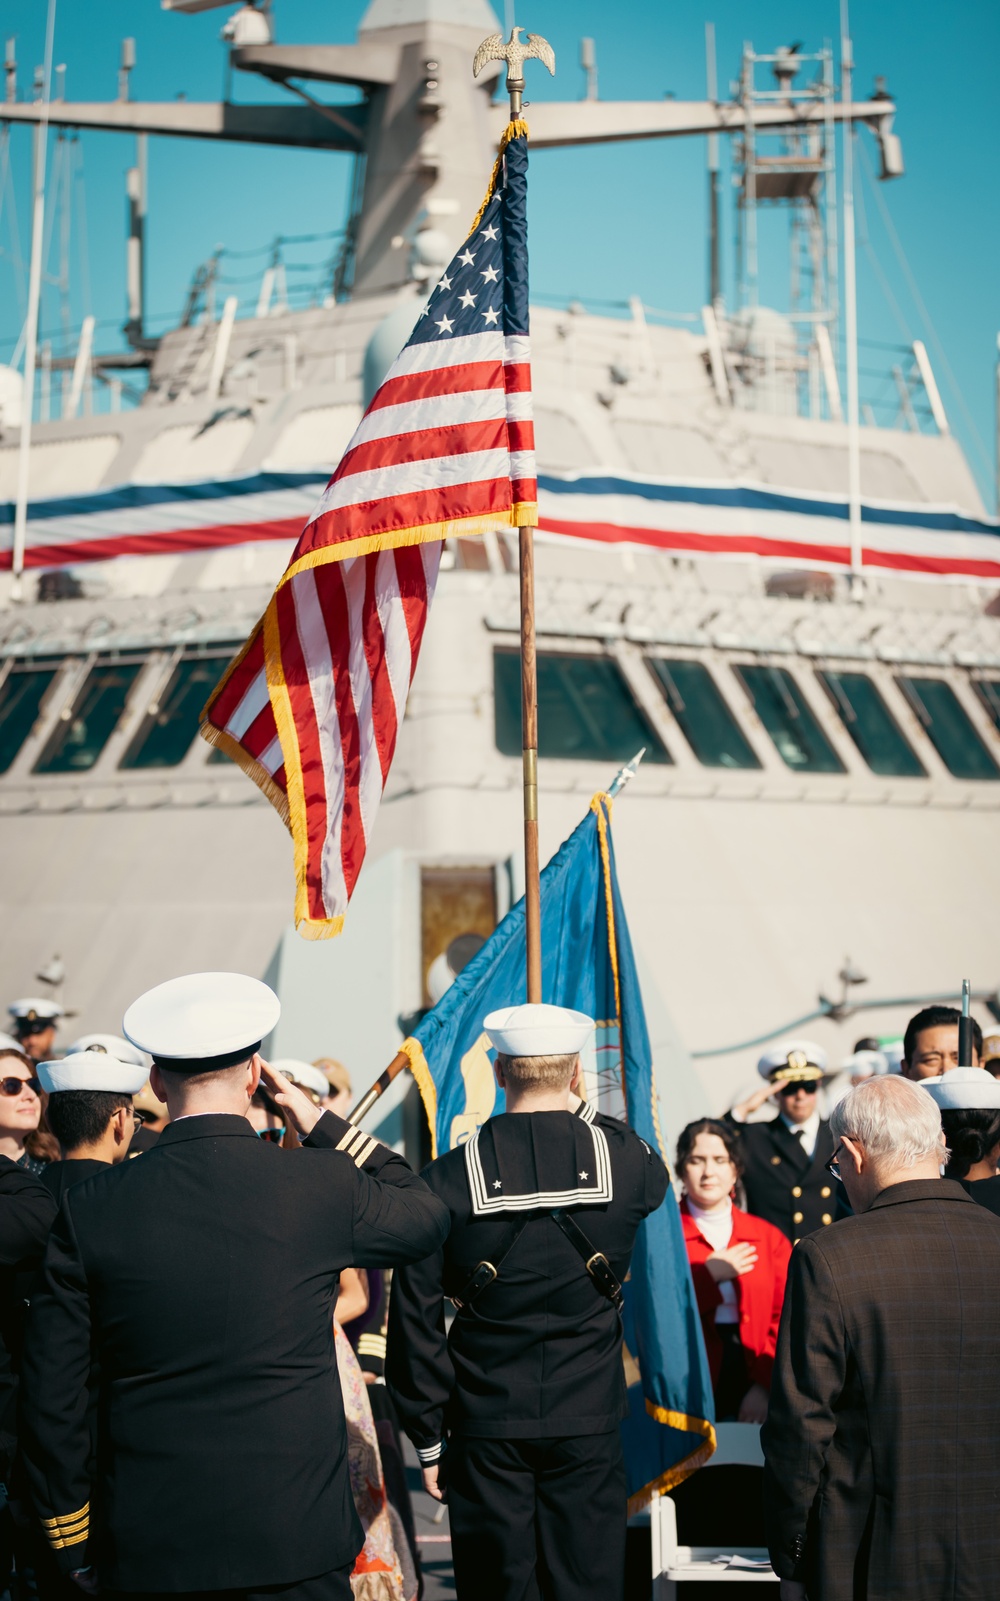 USS COOPERSTOWN (LCS 23) HOLDS CHANGE OF COMMAND